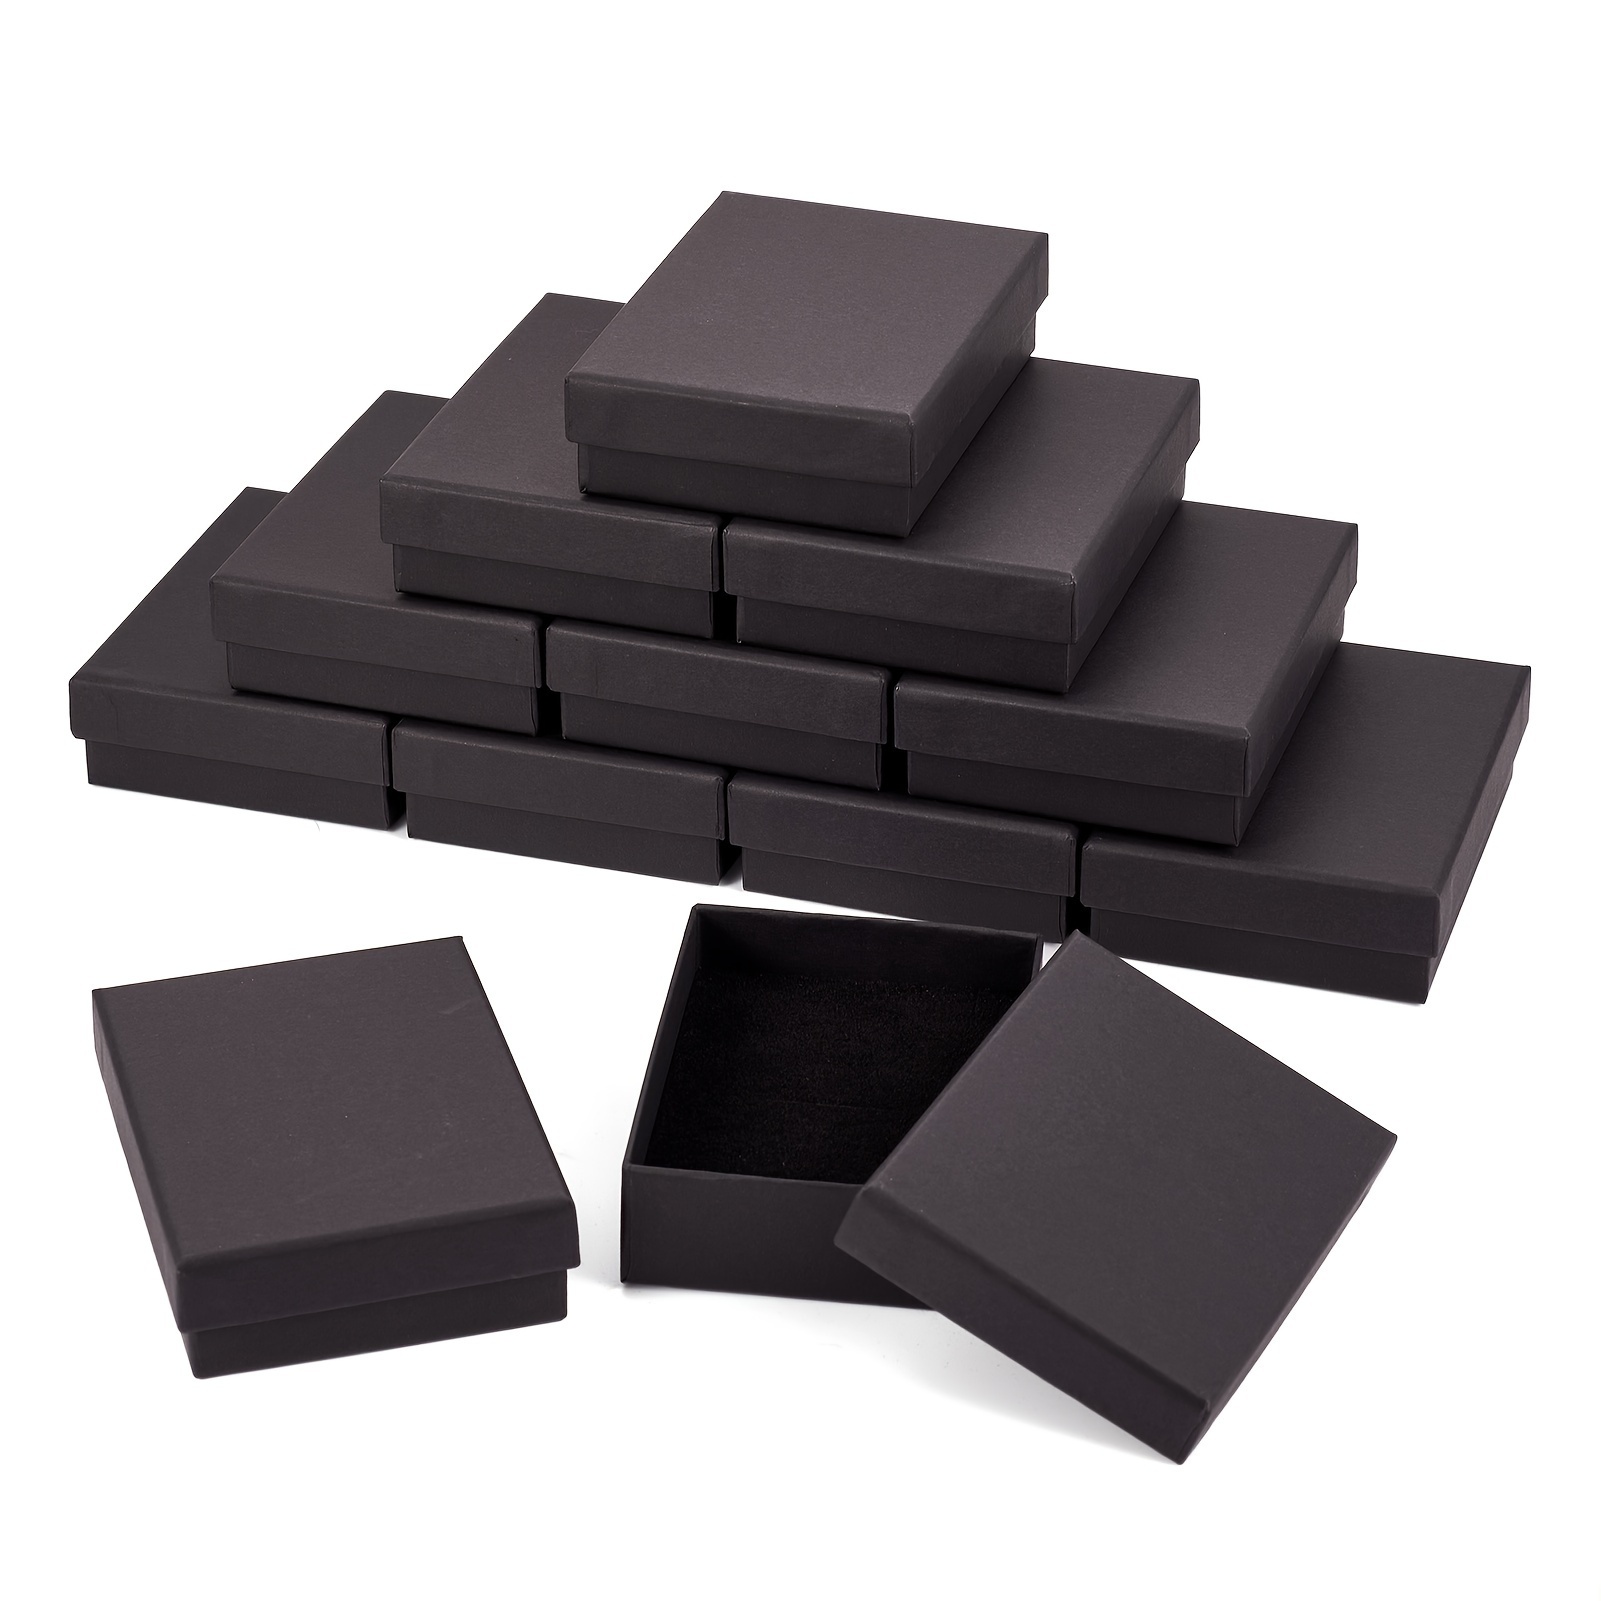 

24pcs Cardboard Sponge Inside Jewelry Set Boxes, Upscale Black Rectangle 9x6.9x2.7cm For Jewelry Packaging Display Storage Valentine's Day Gift Boxes Small Business Supplies